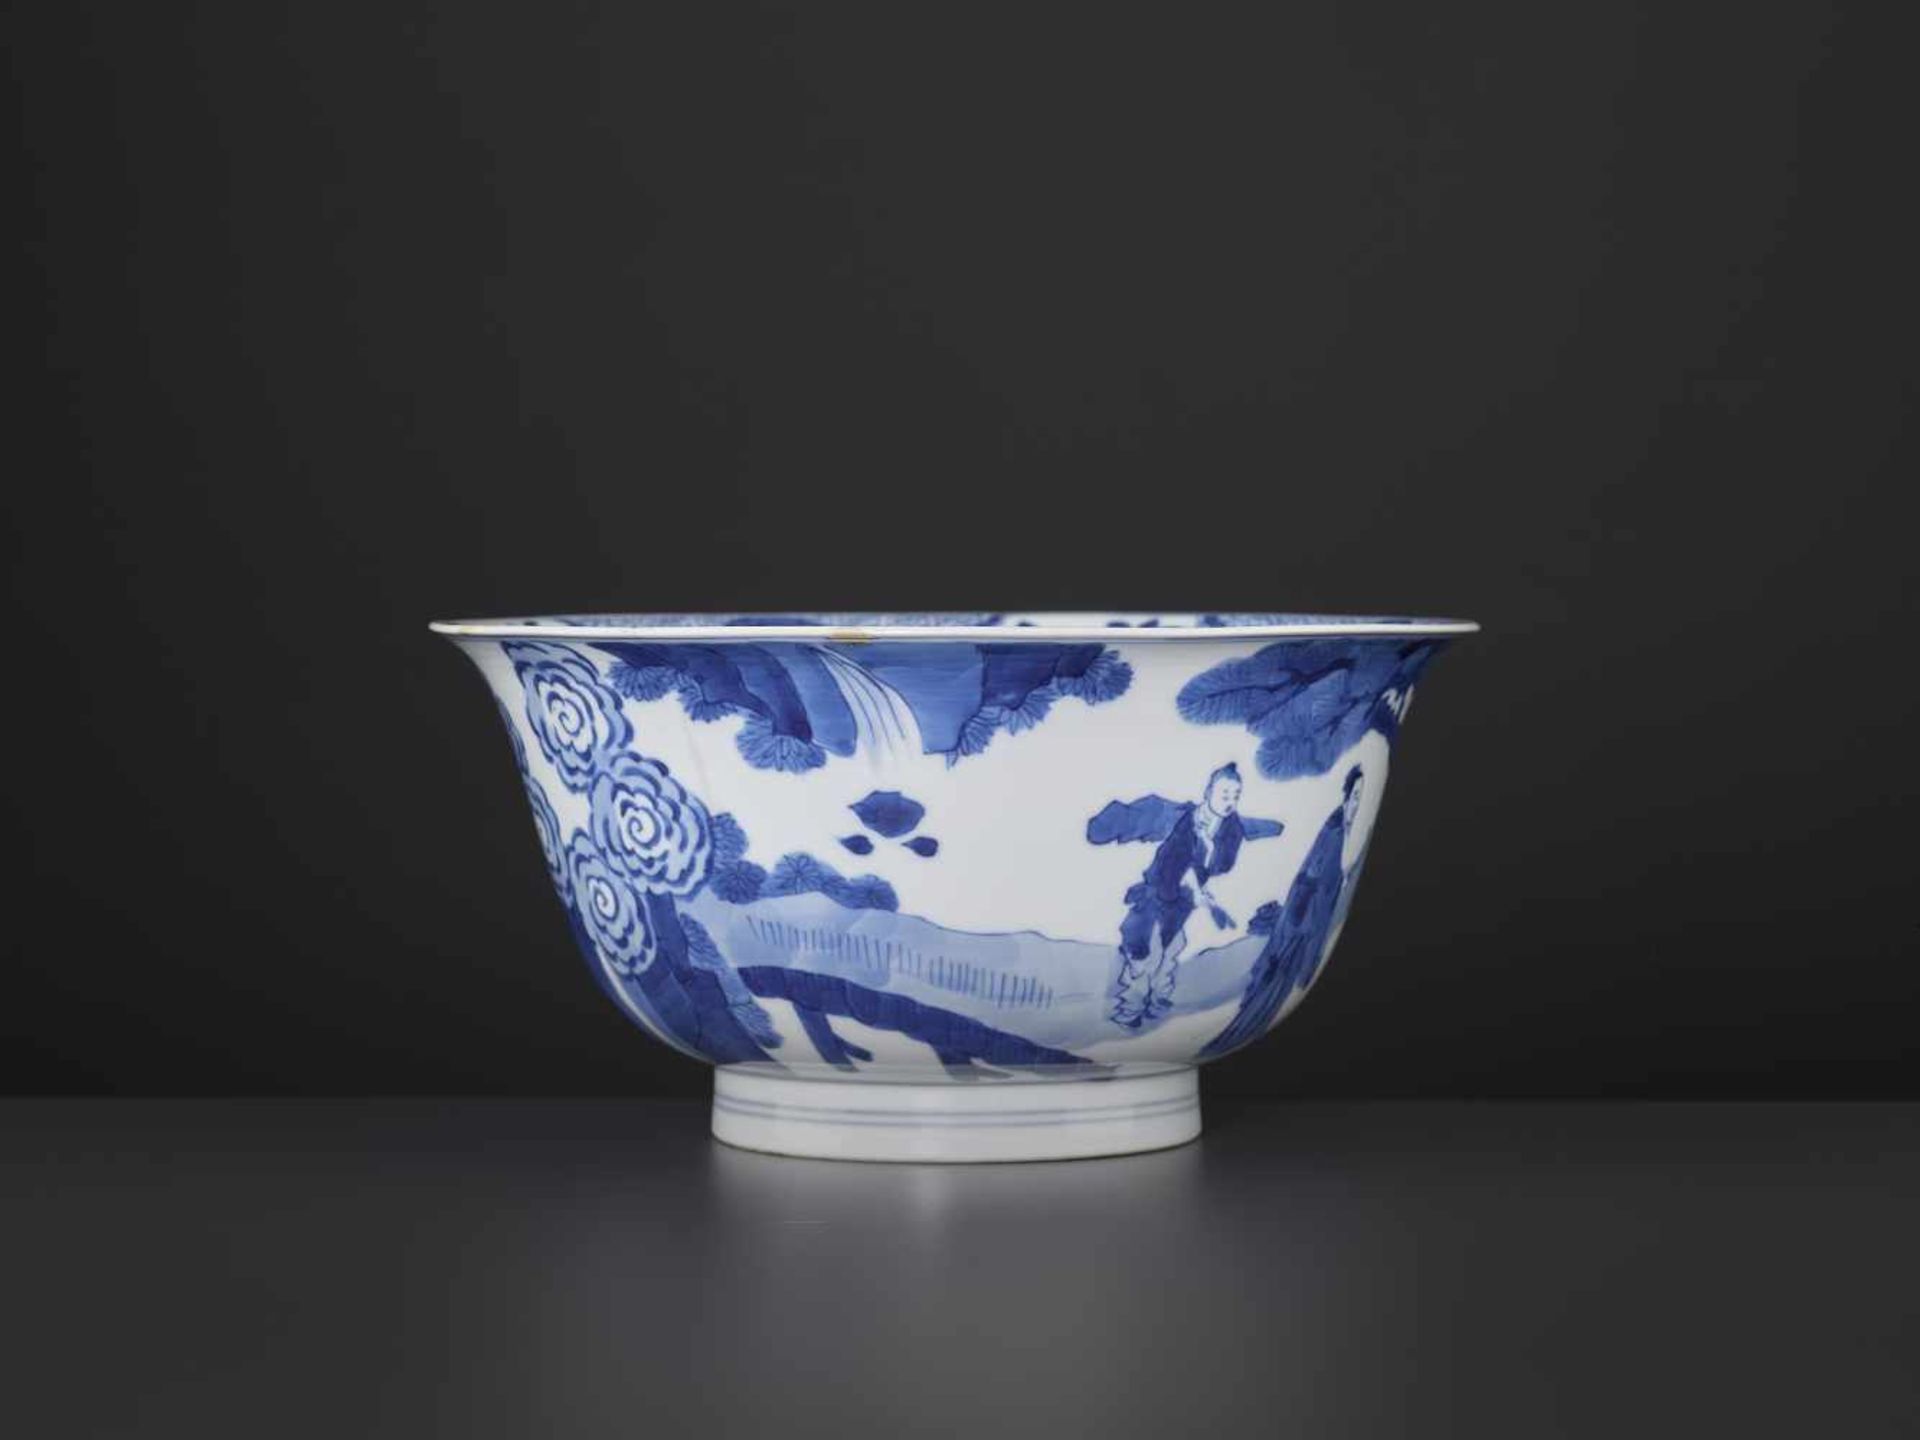 A KANGXI PERIOD WEIQI PLAYER BOWLChina, 1662-1722. Skillfully painted in striking cobalt-blue with - Image 10 of 11